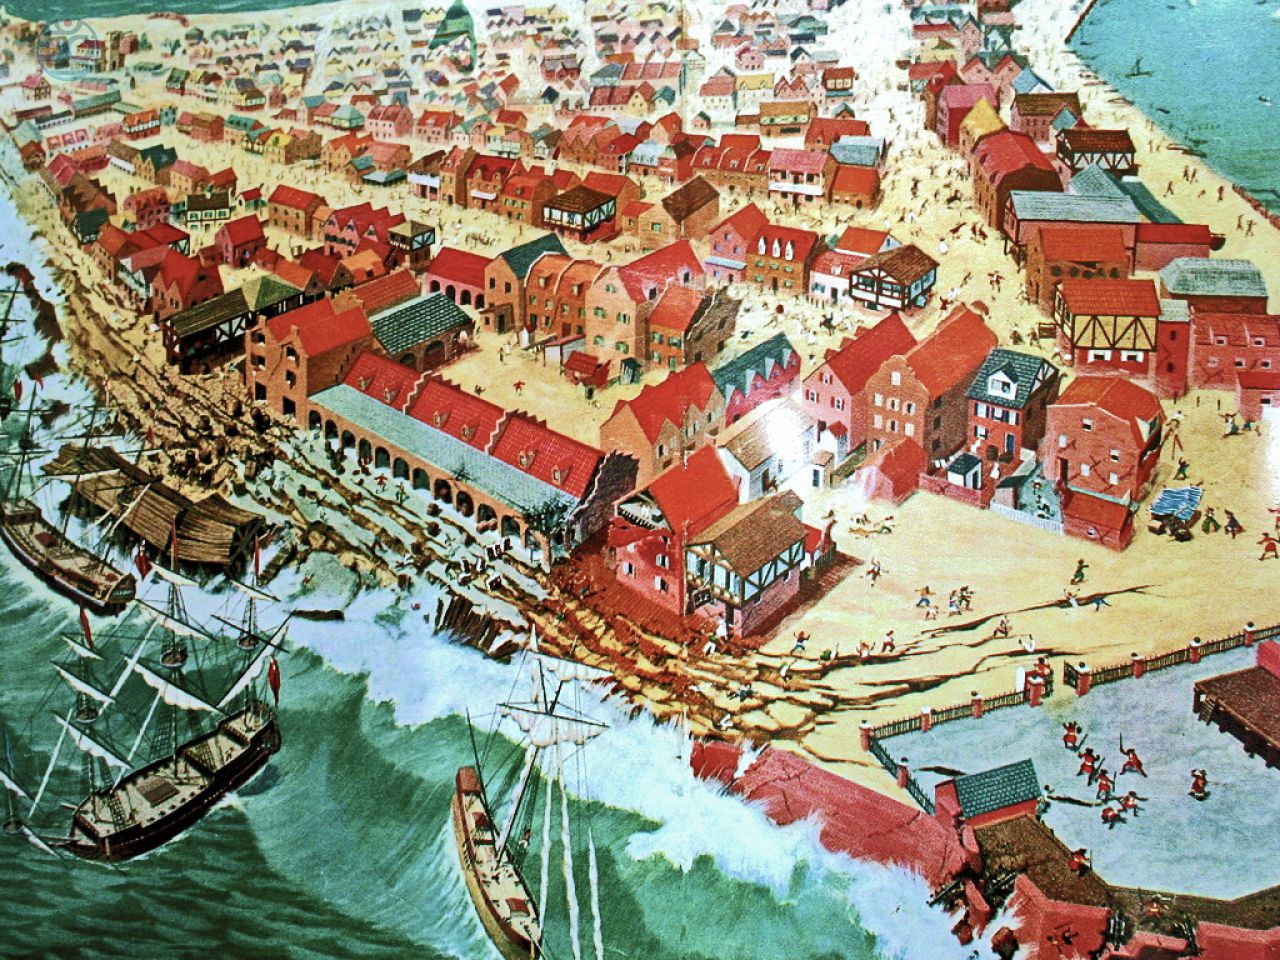 Port Royal in the 17th century